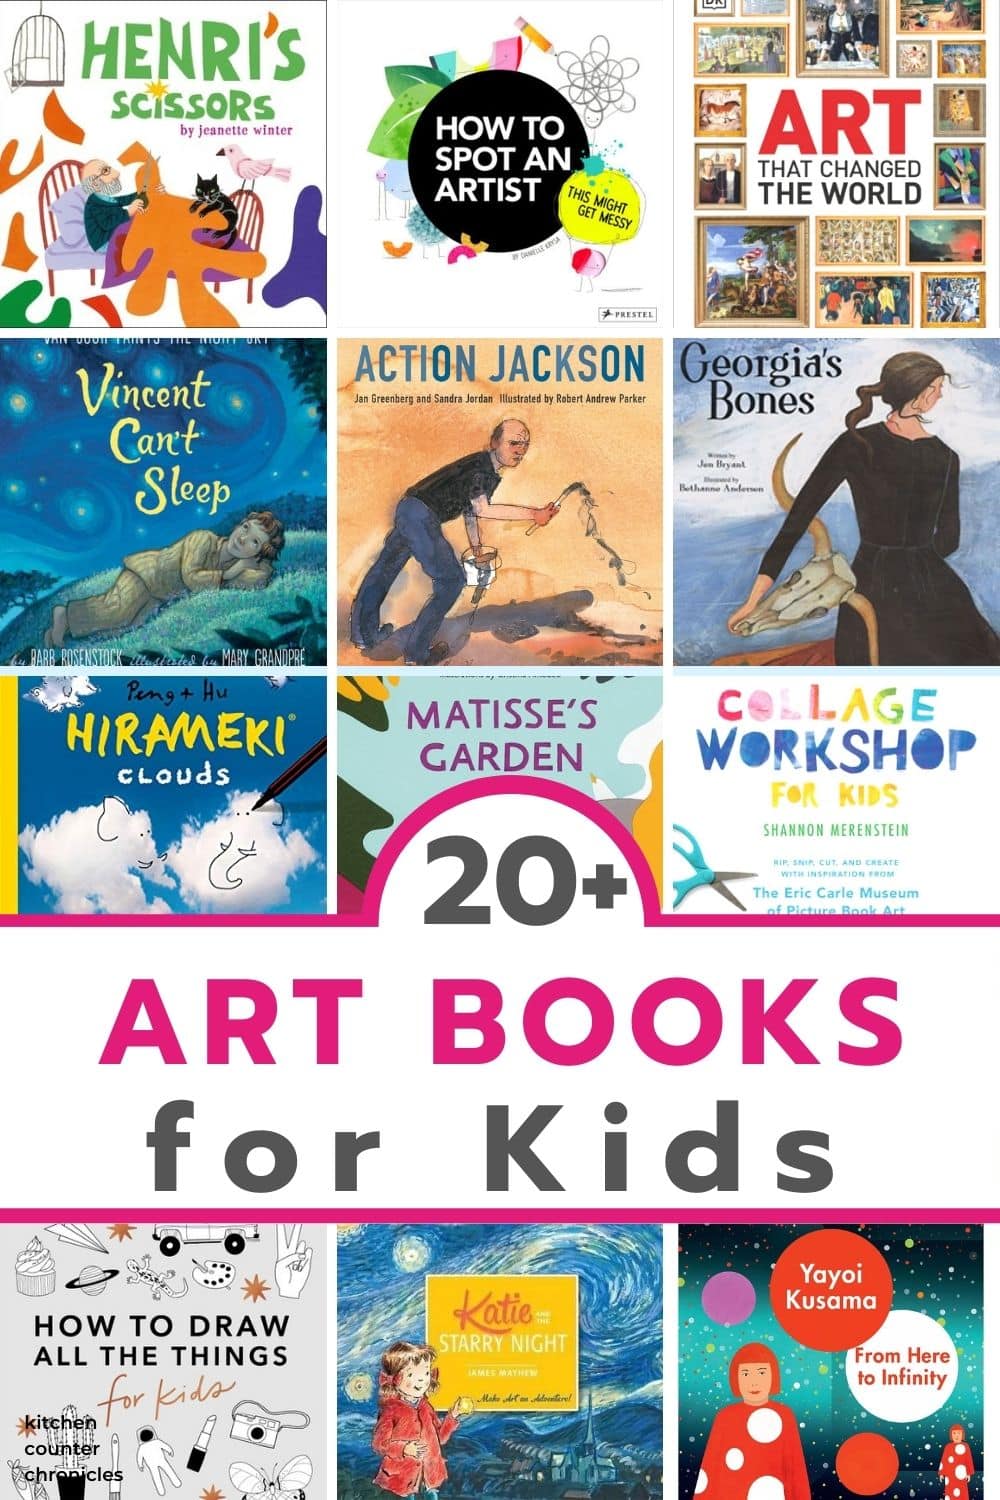 collage of creative art books for kids with title